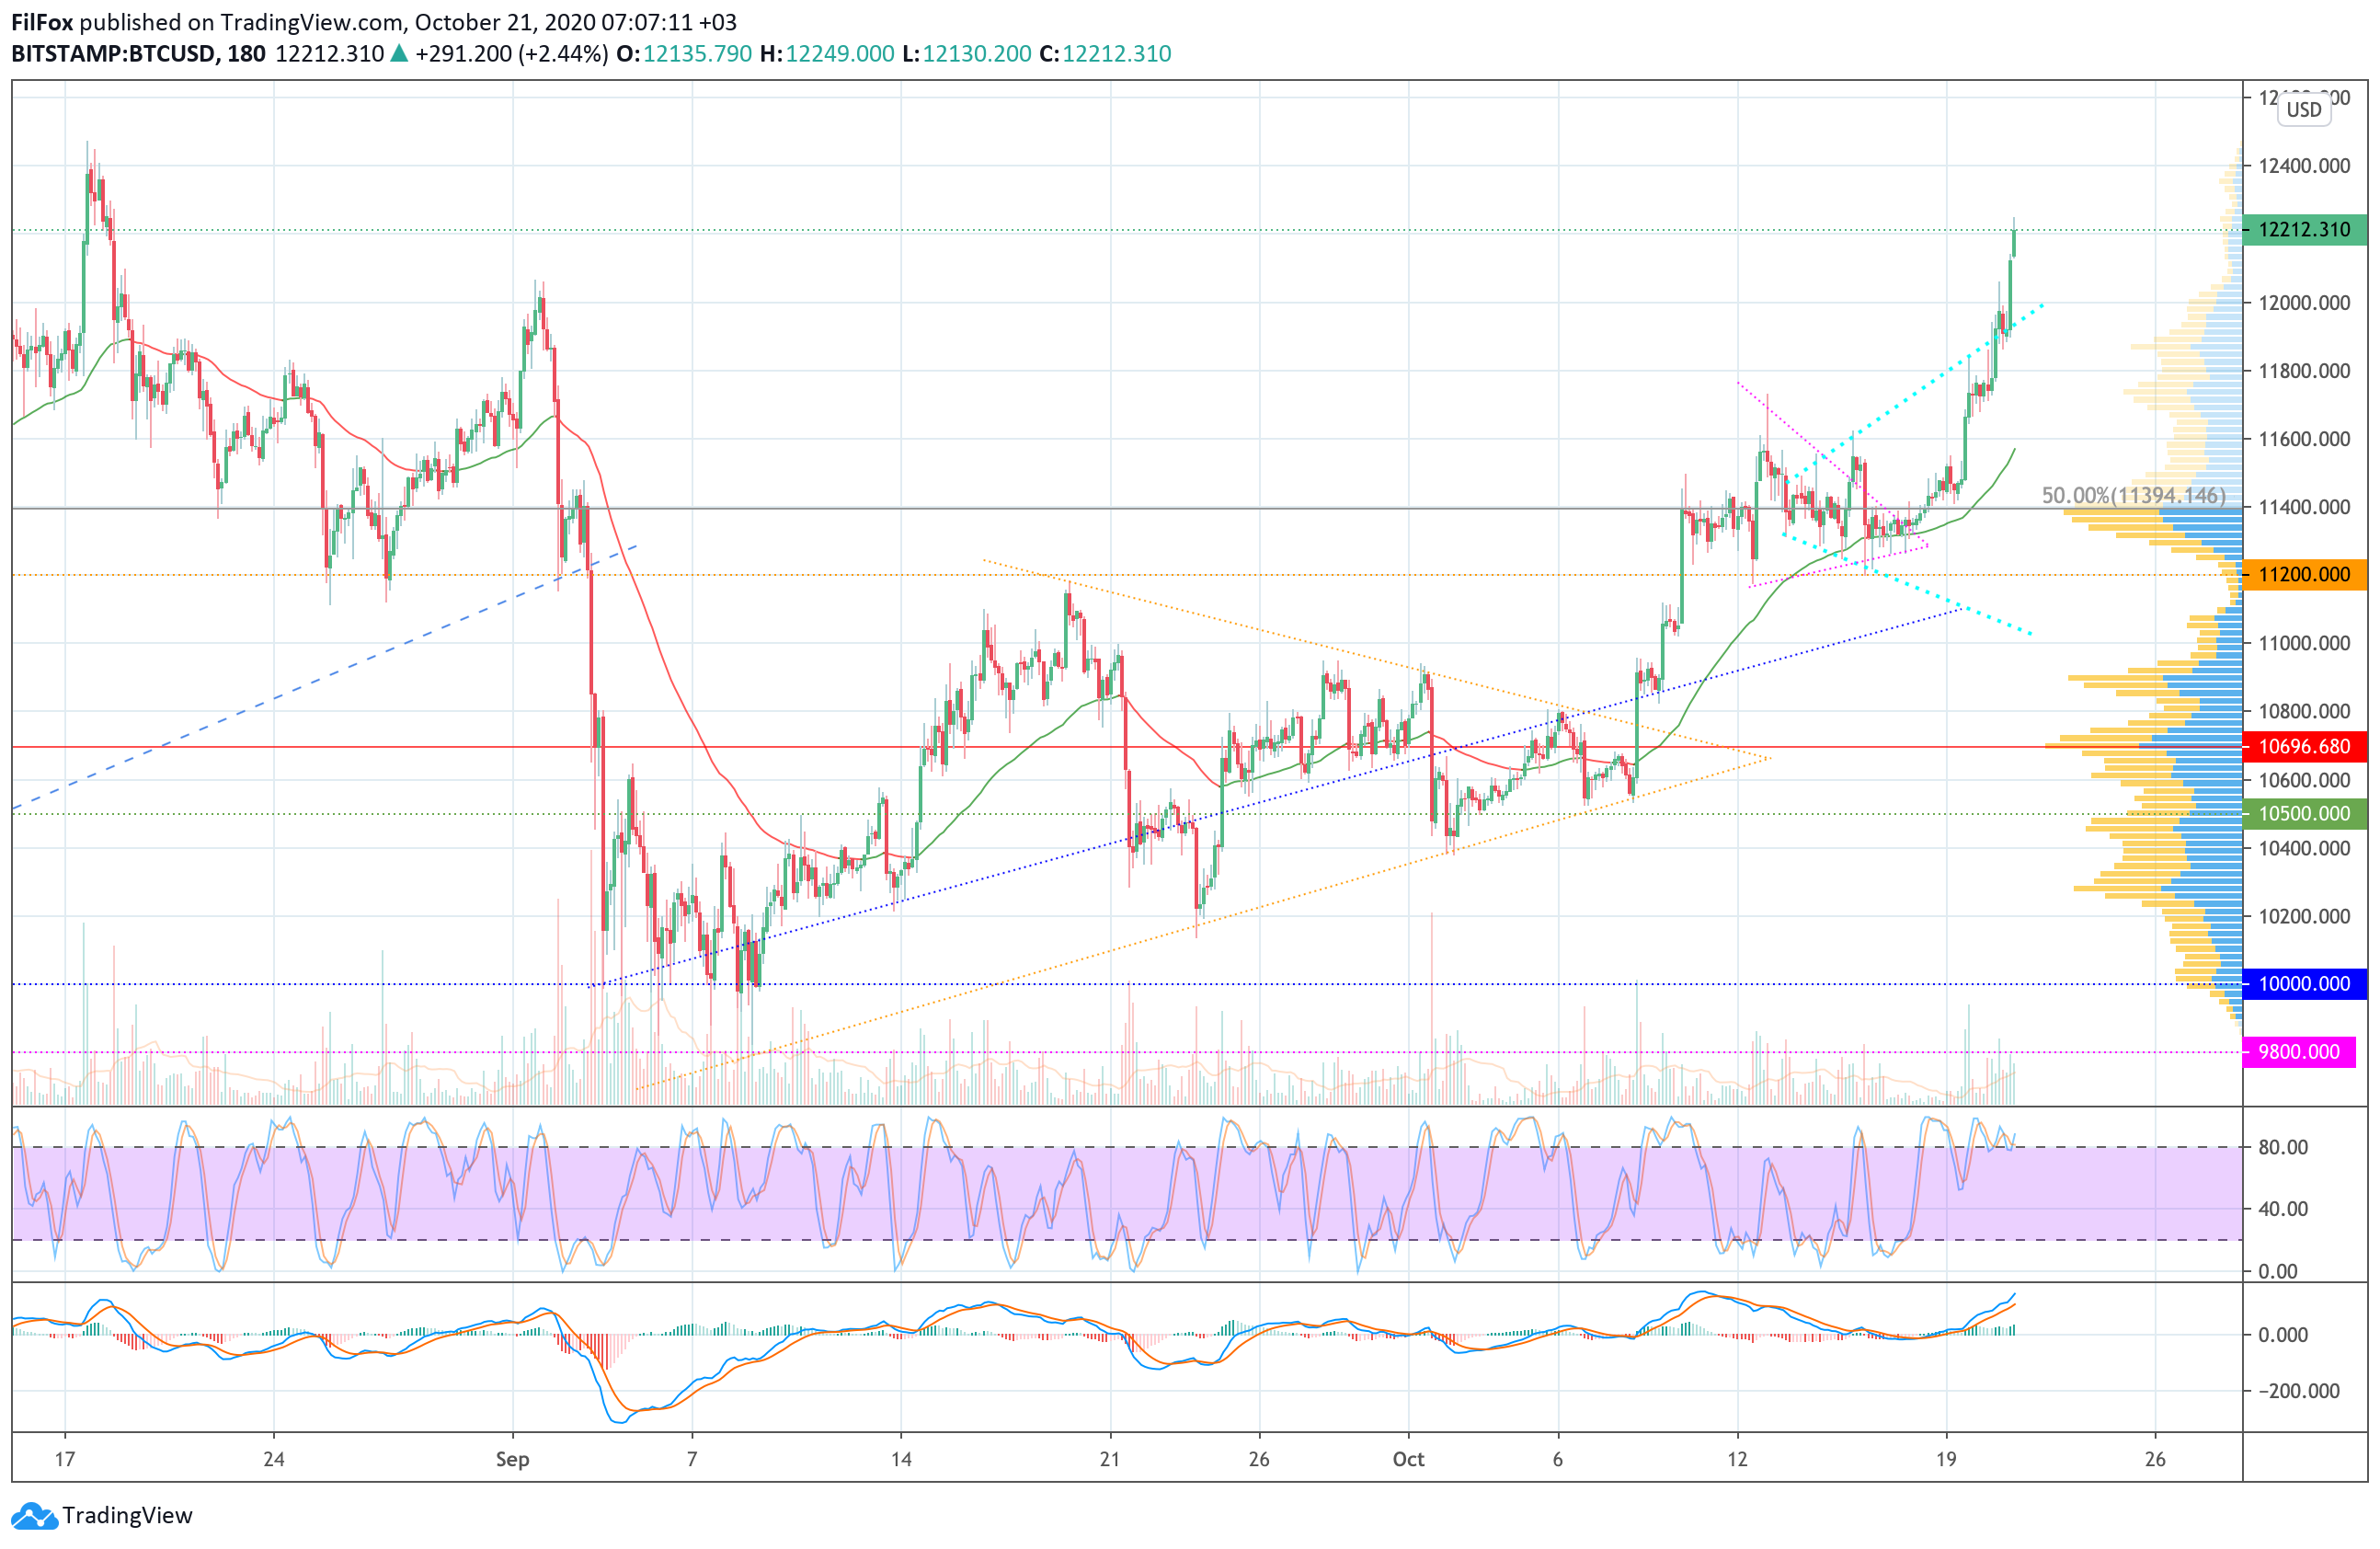 Analysis of the prices of Bitcoin, Ethereum, XRP for 10/21/2020